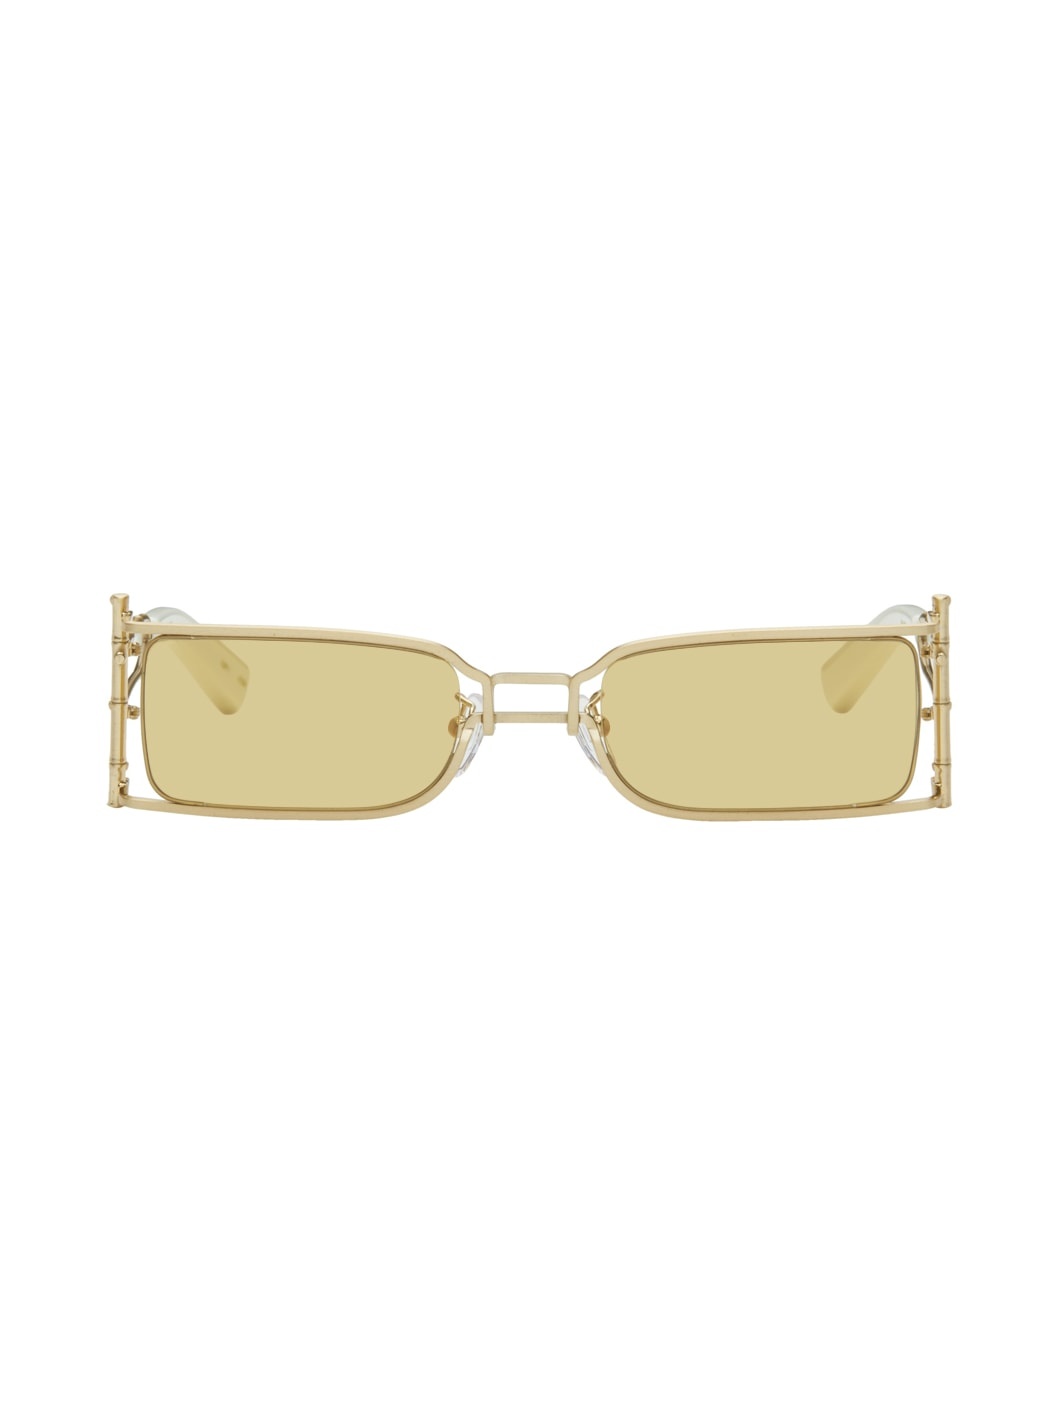 SSENSE Exclusive Gold Bamboo Sunglasses - 1